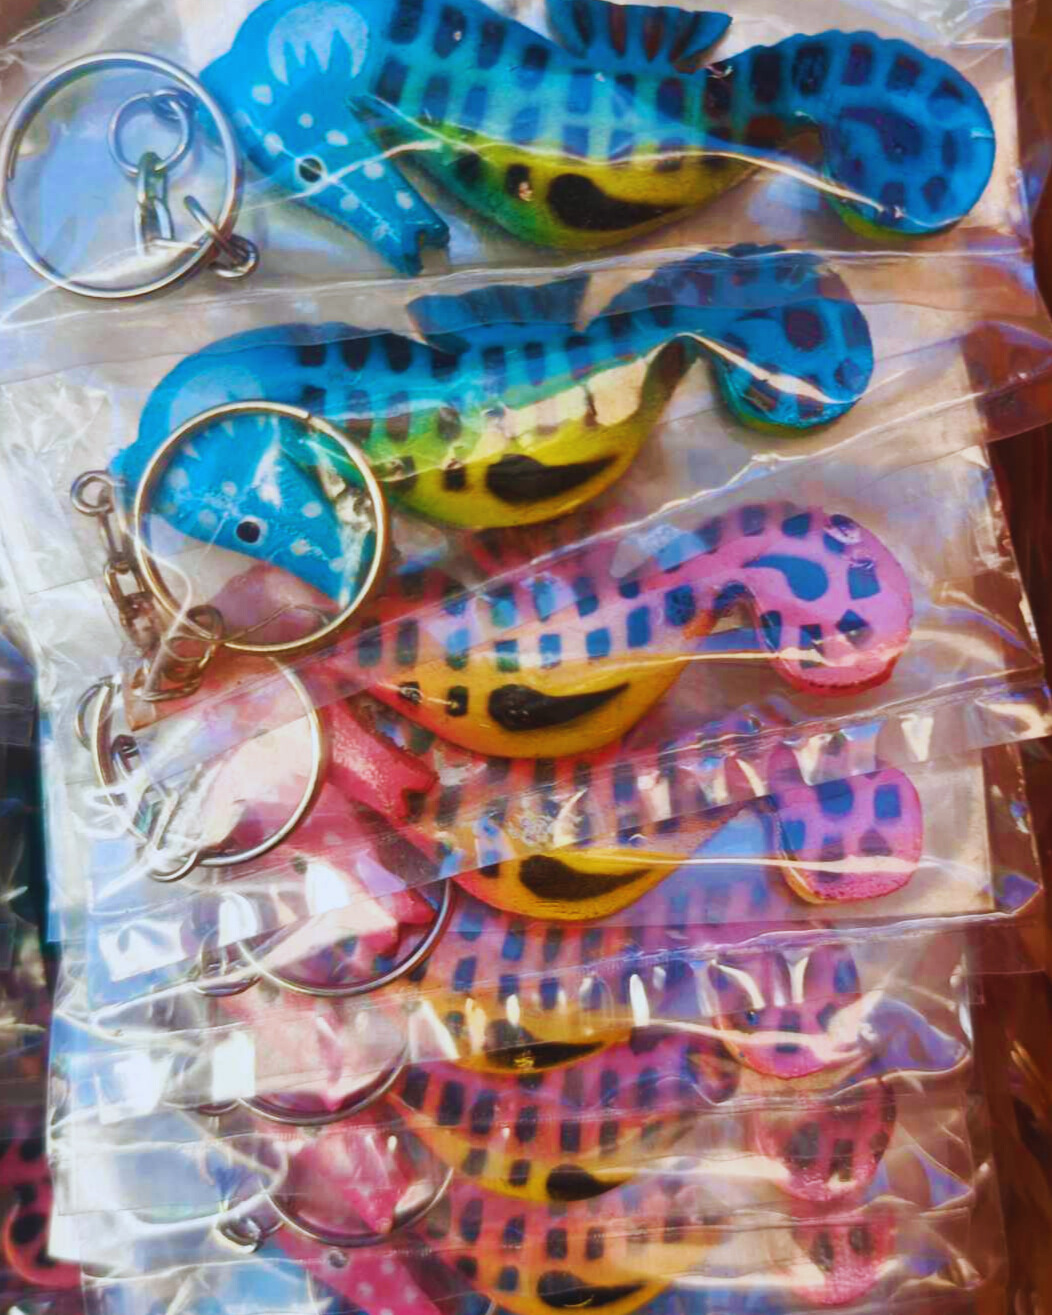 http://www.e-scs.shop/storage/photos/20/Products/Sea Horse Key Chain.jpg